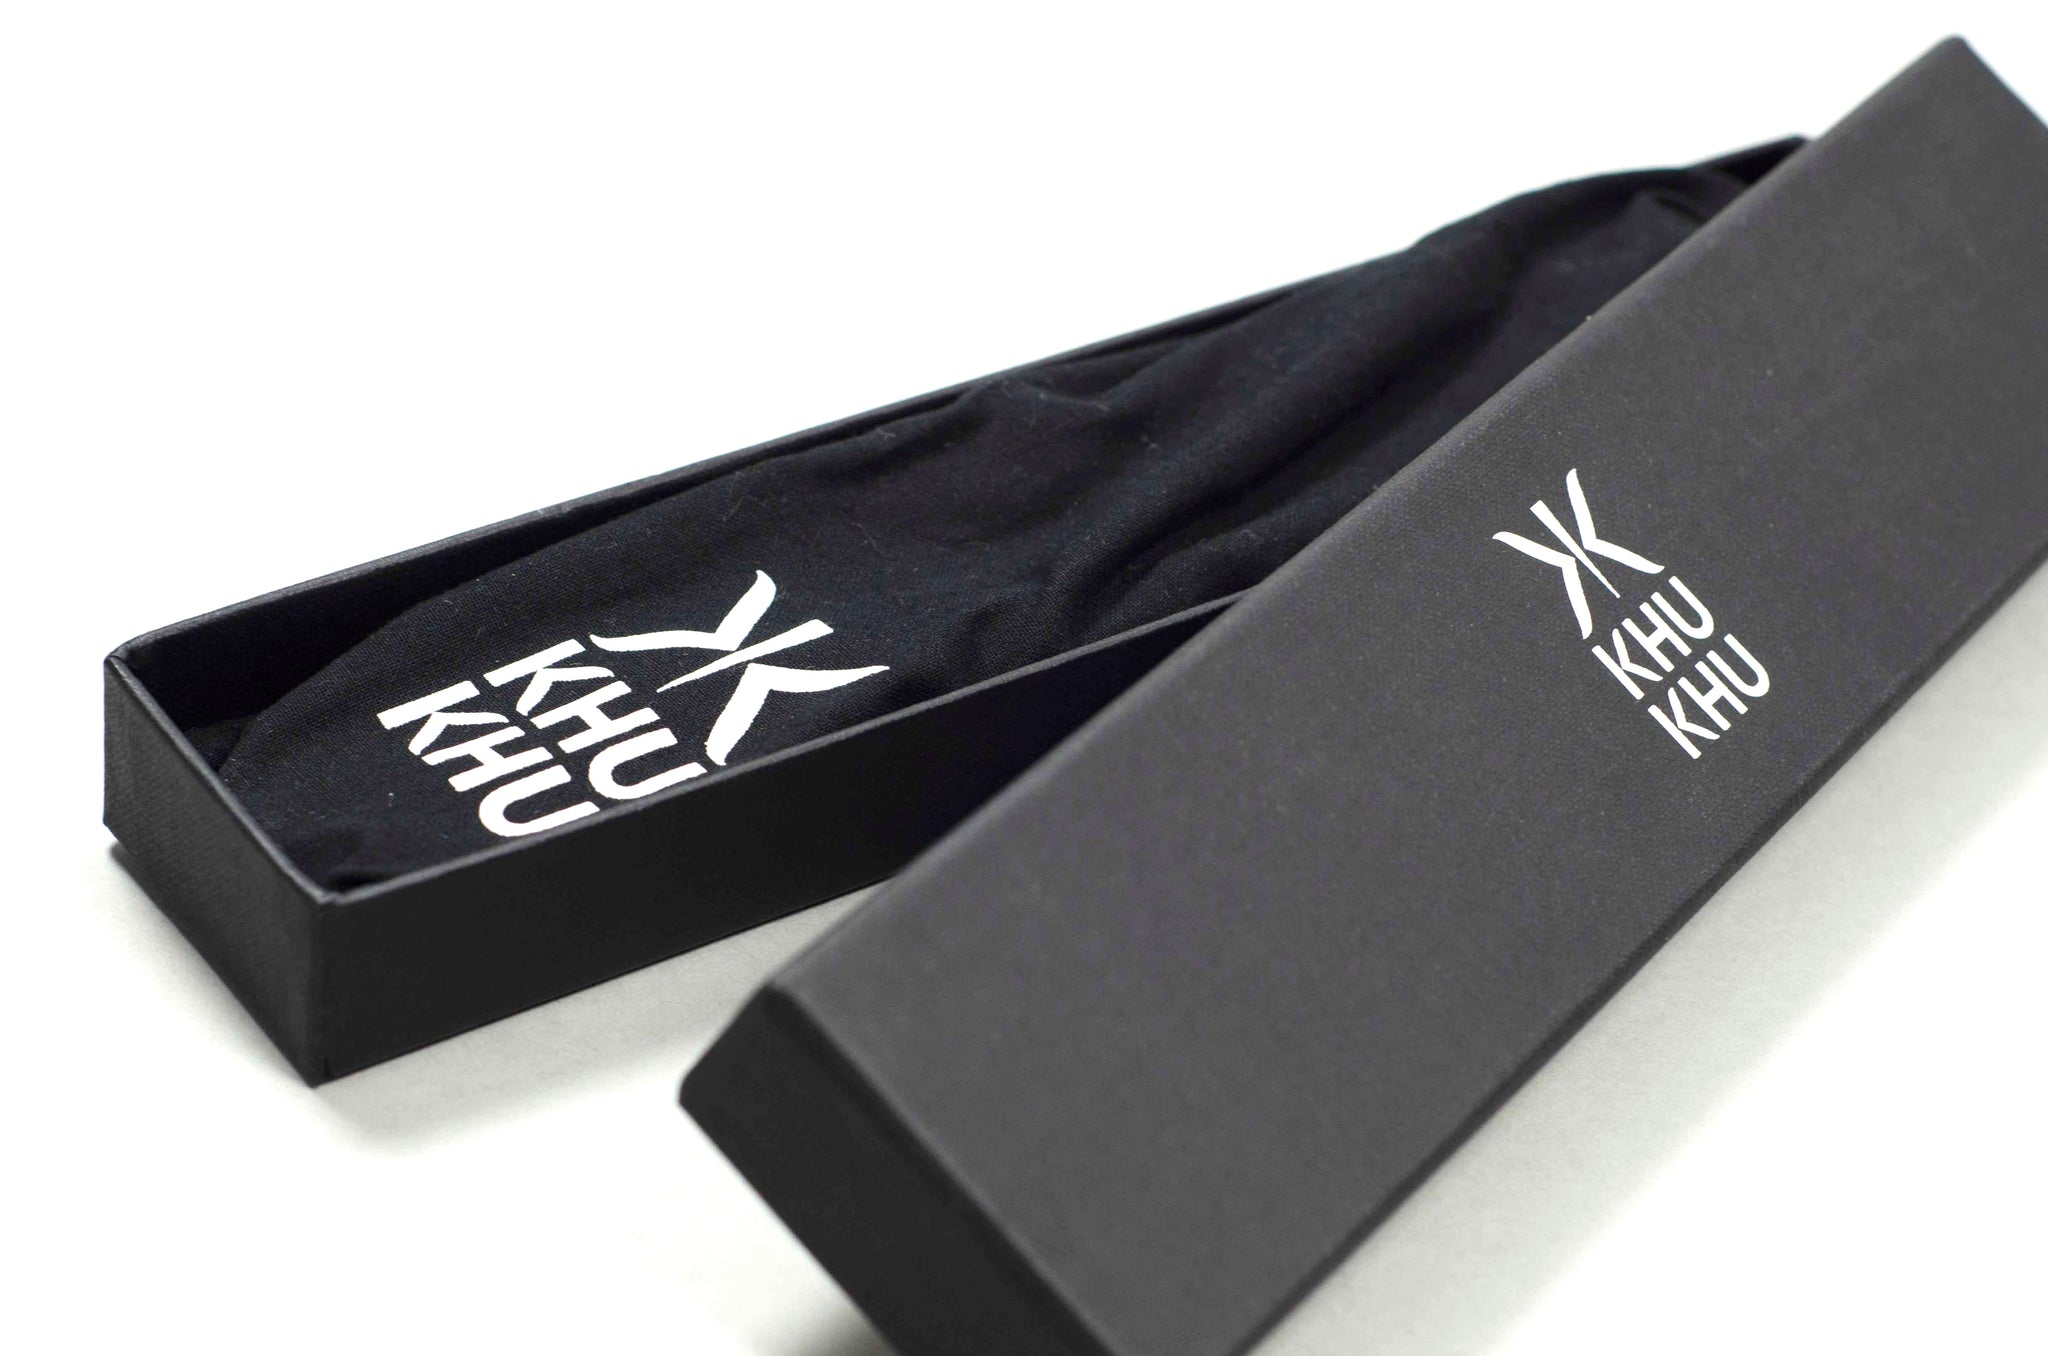 Khu Khu luxury bespoke hand-fan box with view of lid off and cotton travel bag inside.